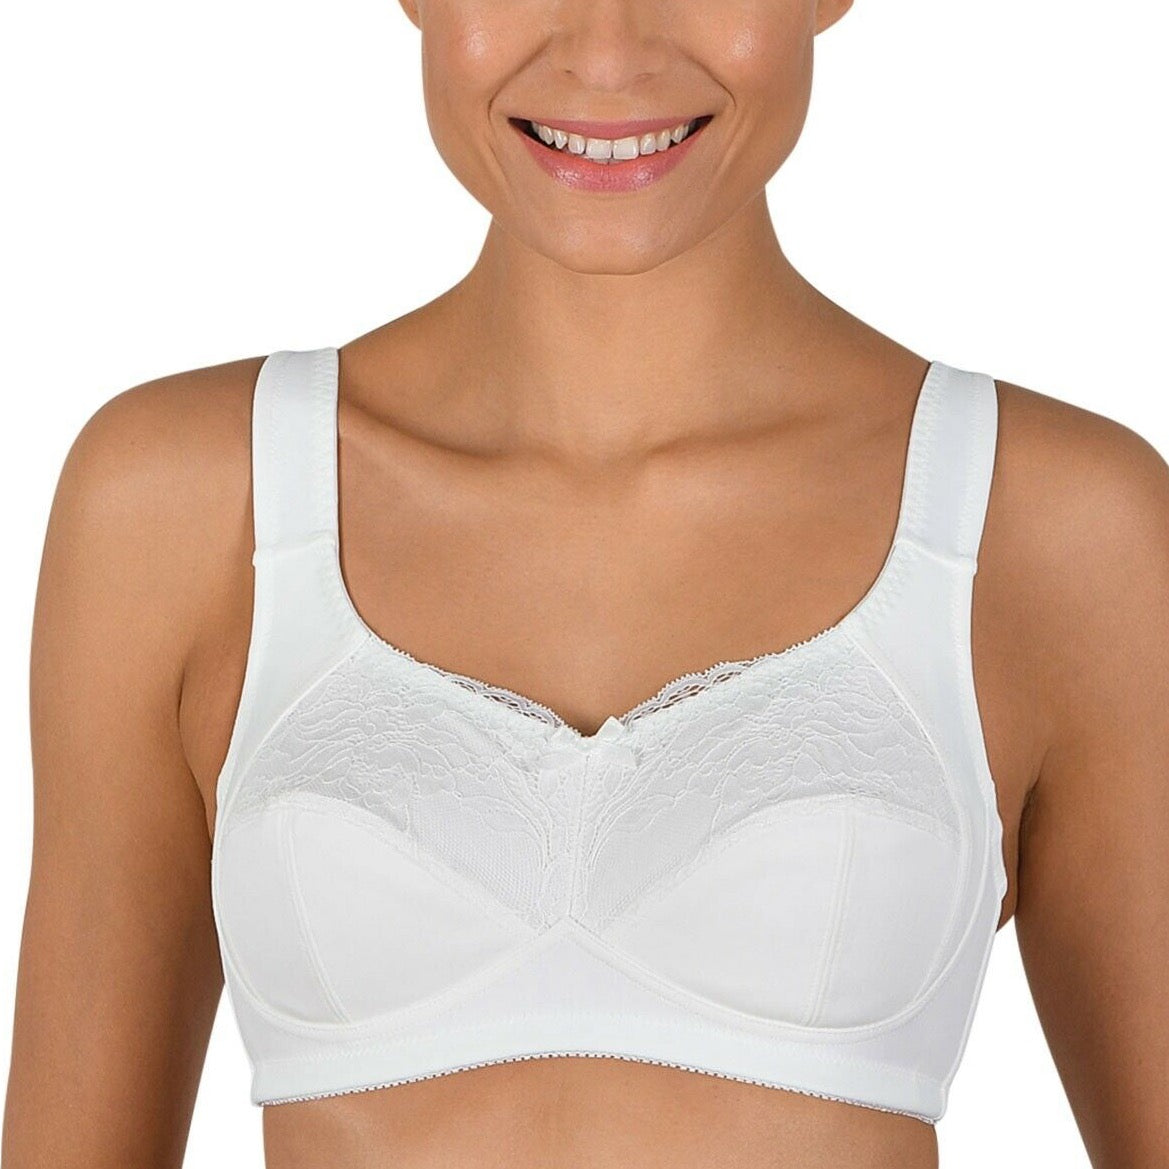 Three Section Mastectomy Bra in white by Naturana | Mastectomy Bras & Lingerie